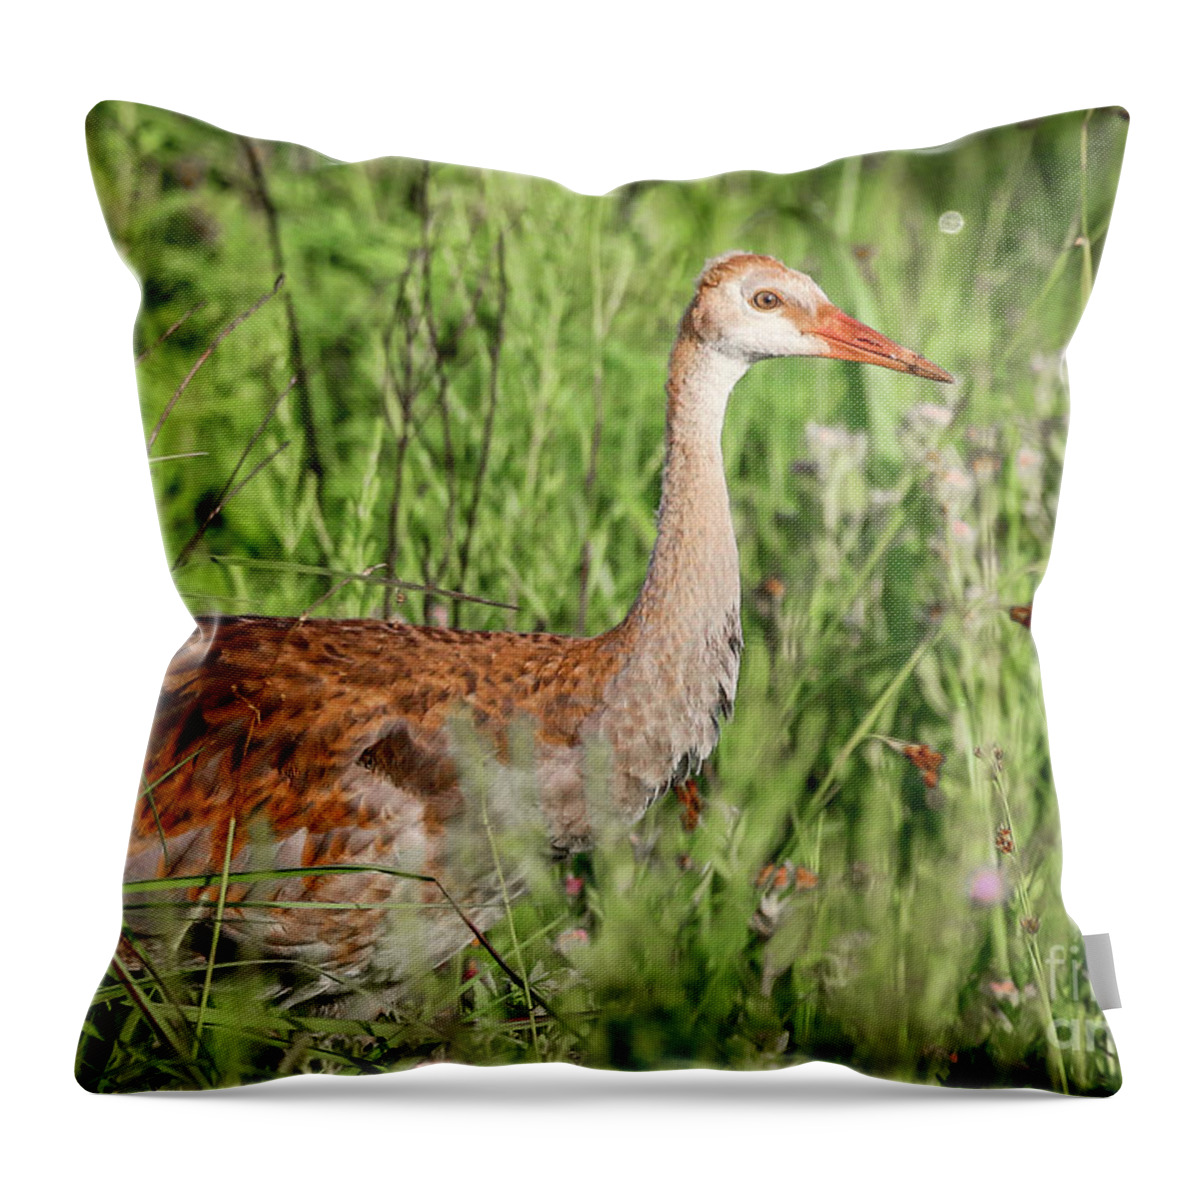 Crane Throw Pillow featuring the photograph Juvenile Sandhill by Tom Claud